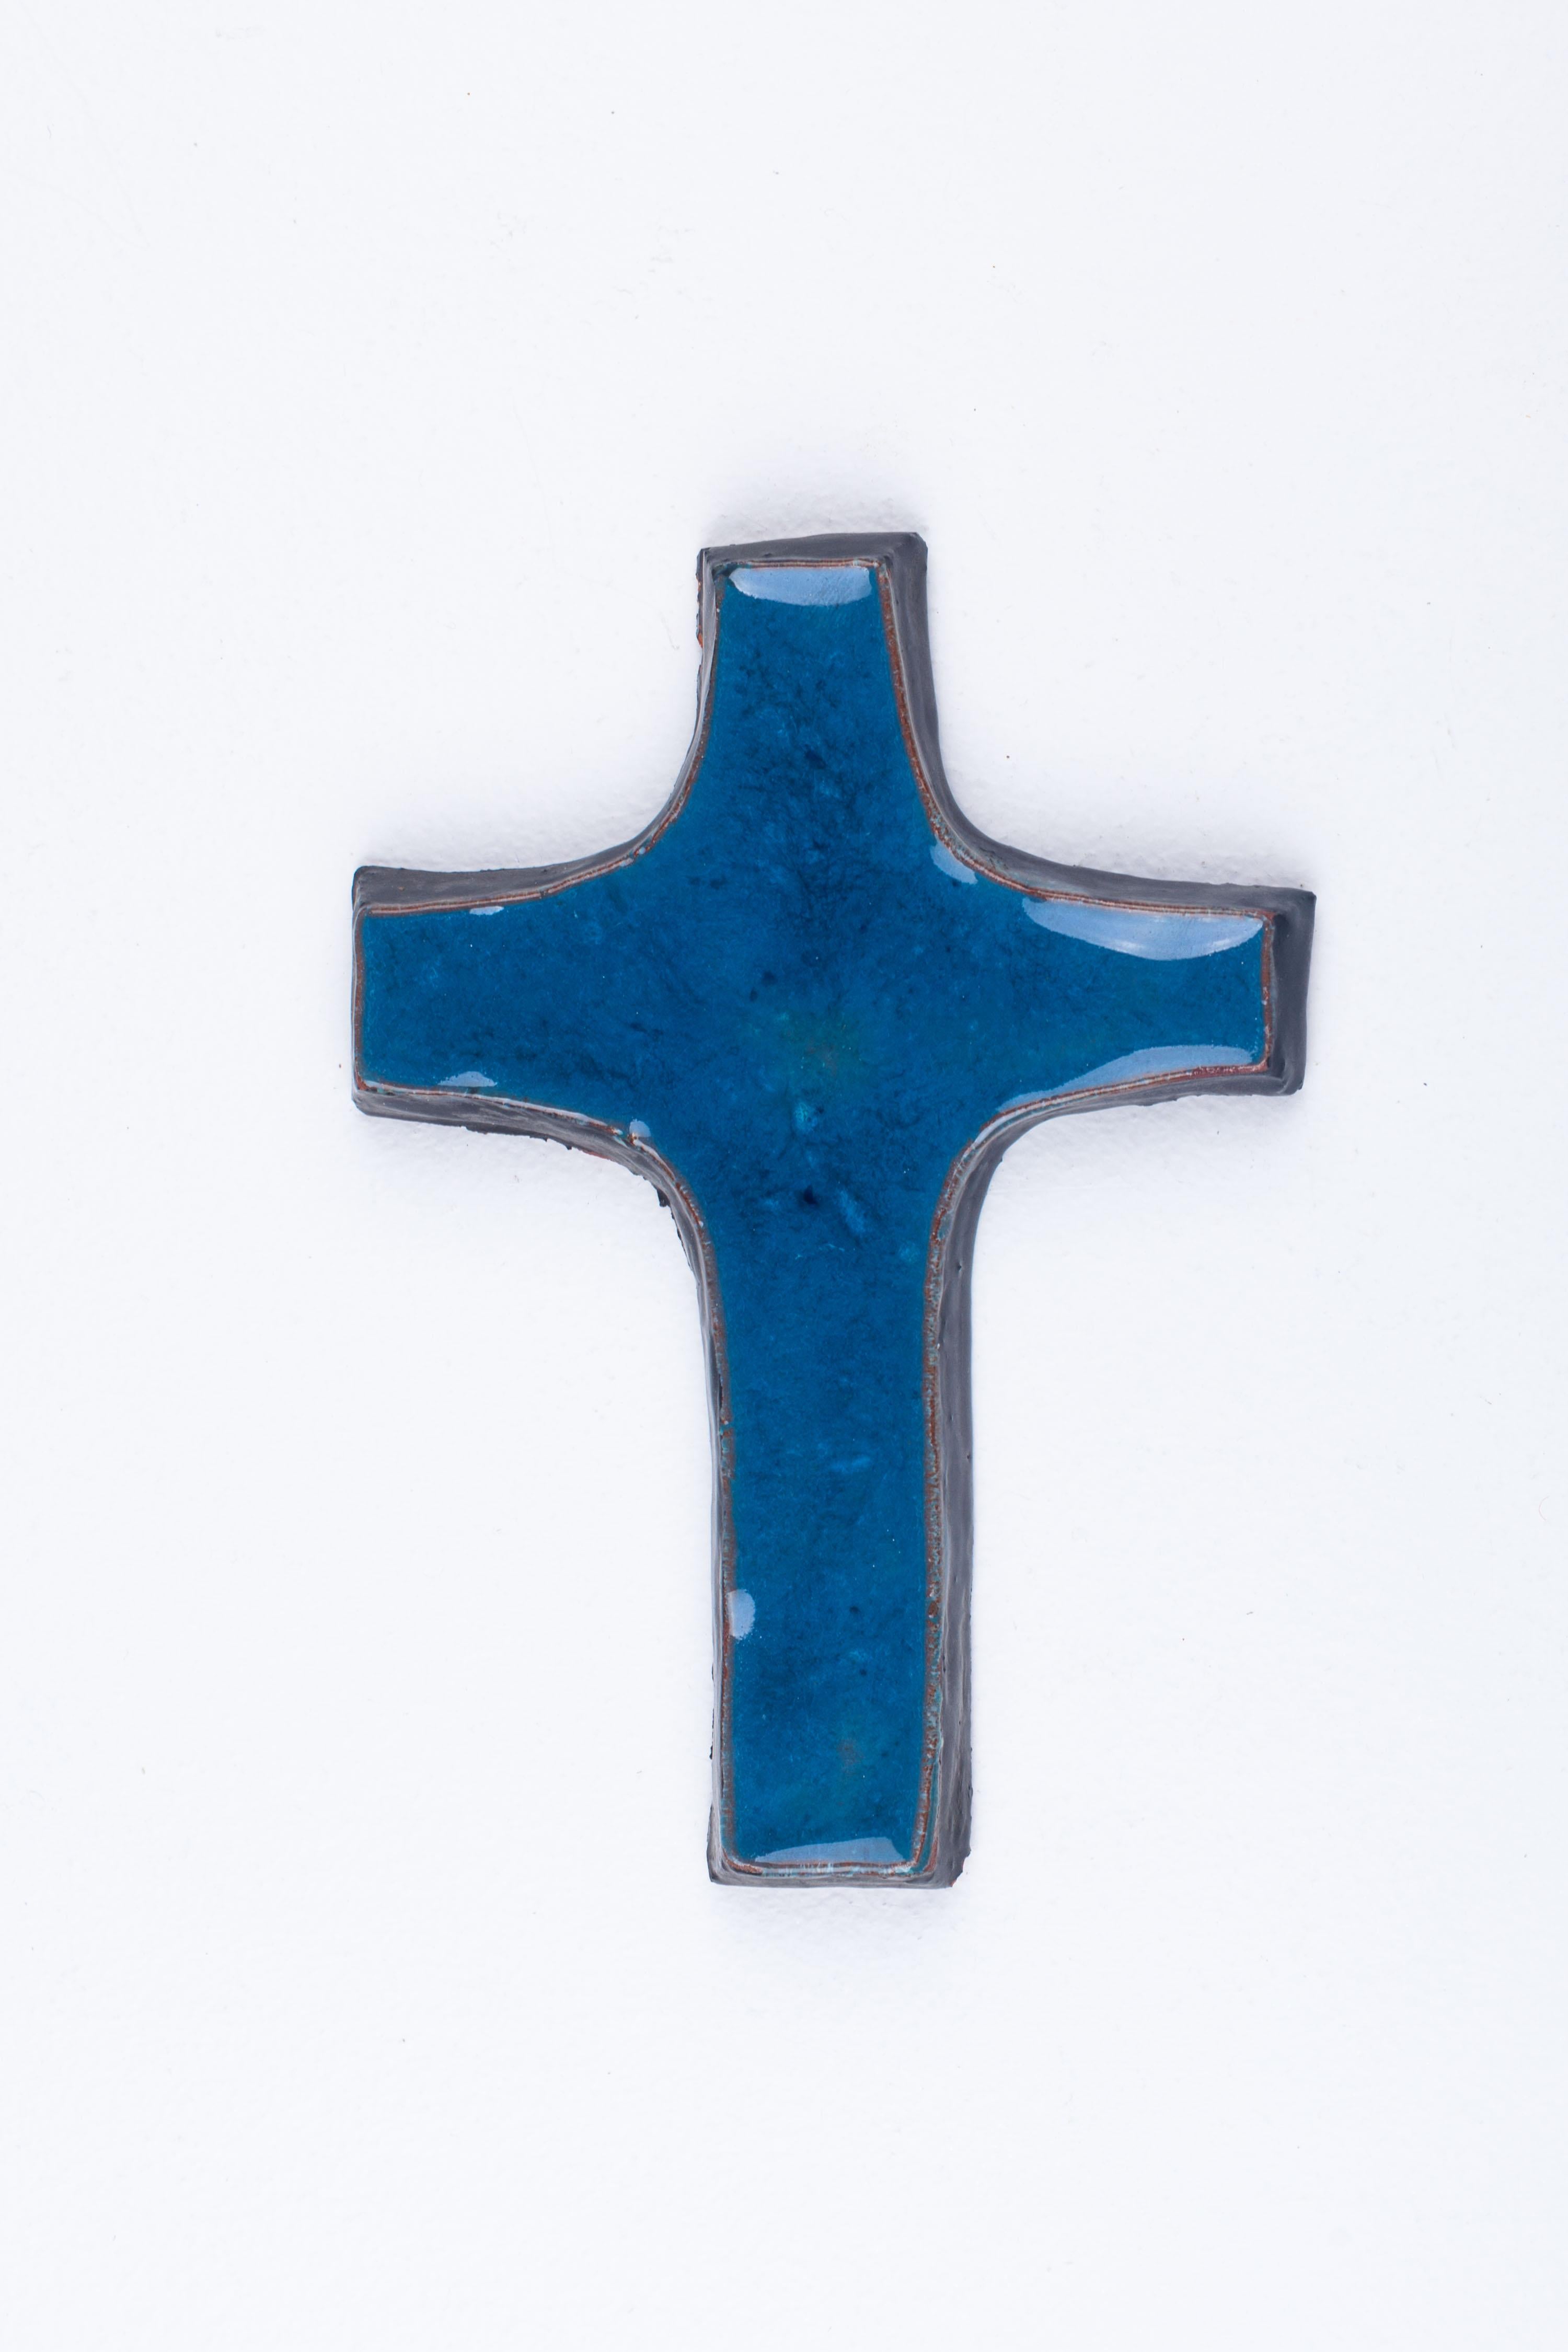 This cross's vibrant blue hues, crafted in varying depths by Flemish artisans, create a multidimensional aspect that captures the eye. From the luminous light blues to the profound dark blues, the cross radiates a sense of depth. Adding to its